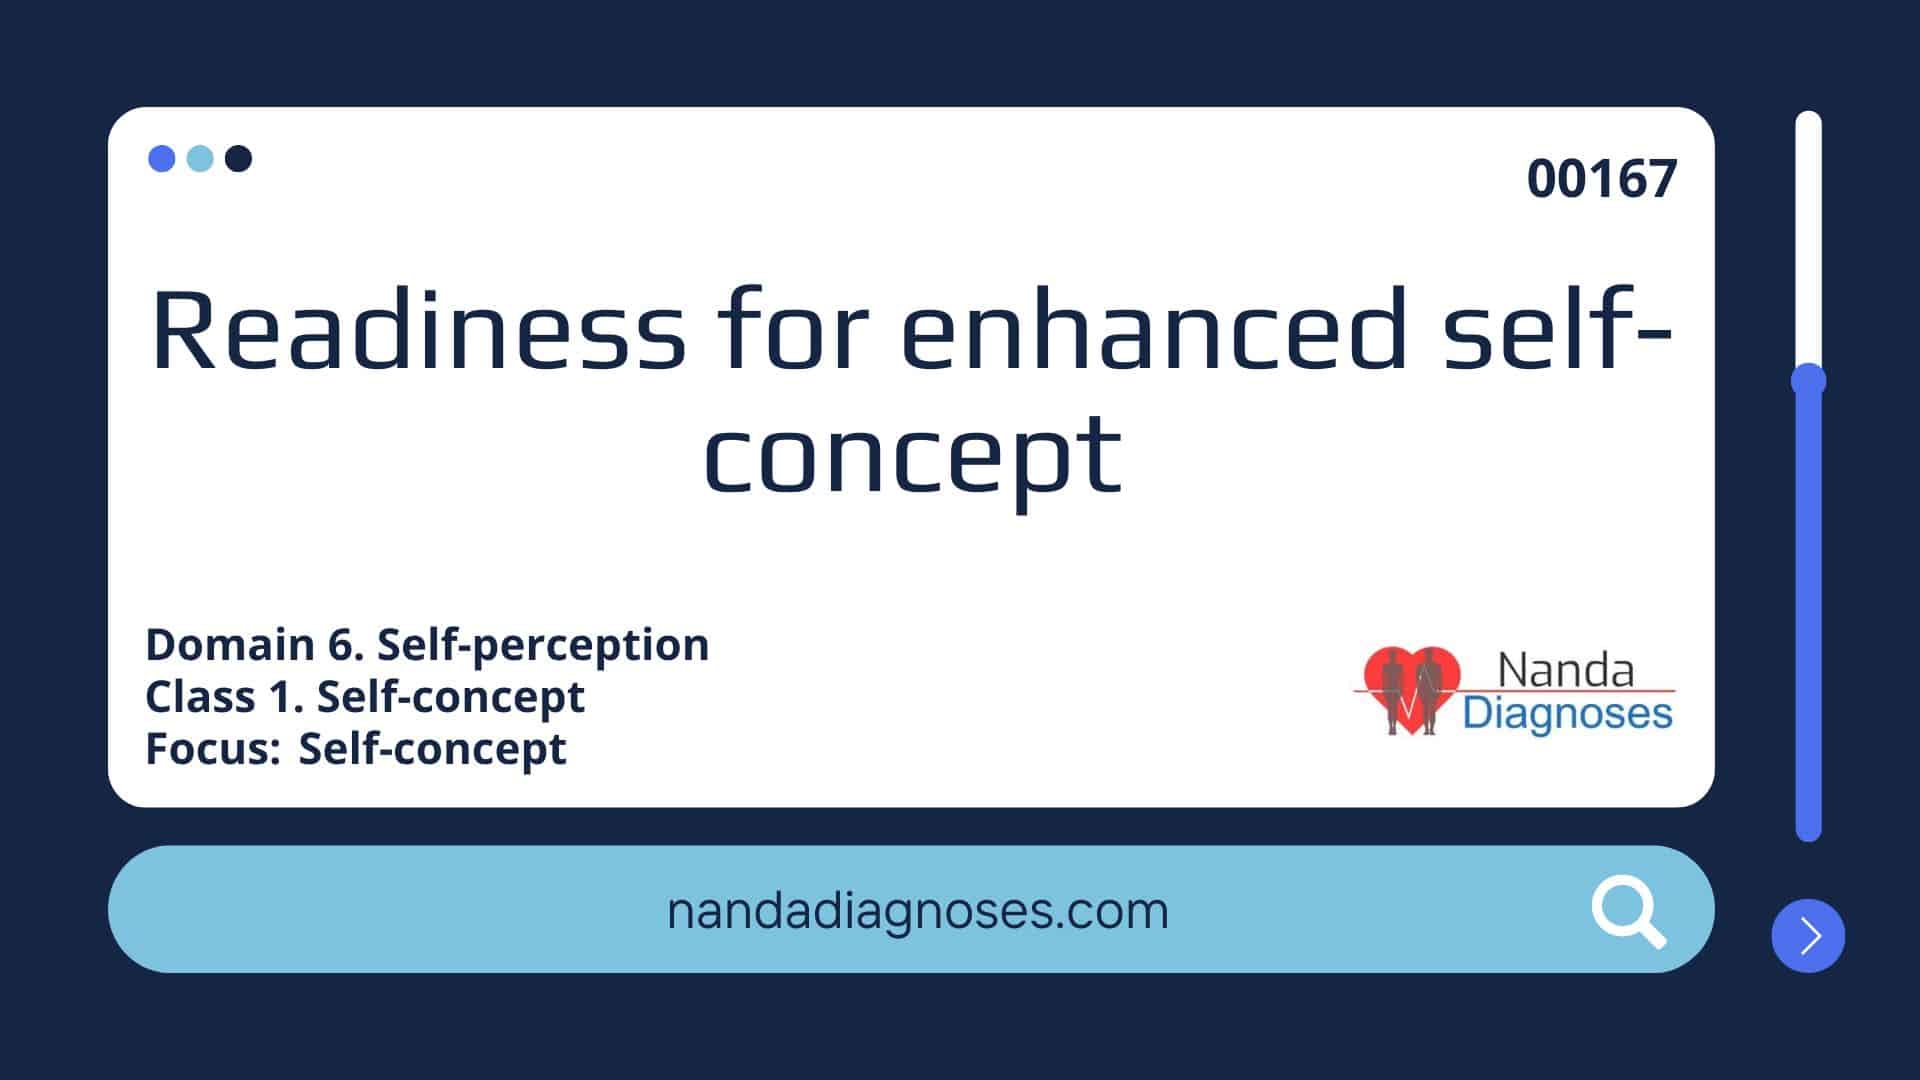 Readiness for enhanced self-concept